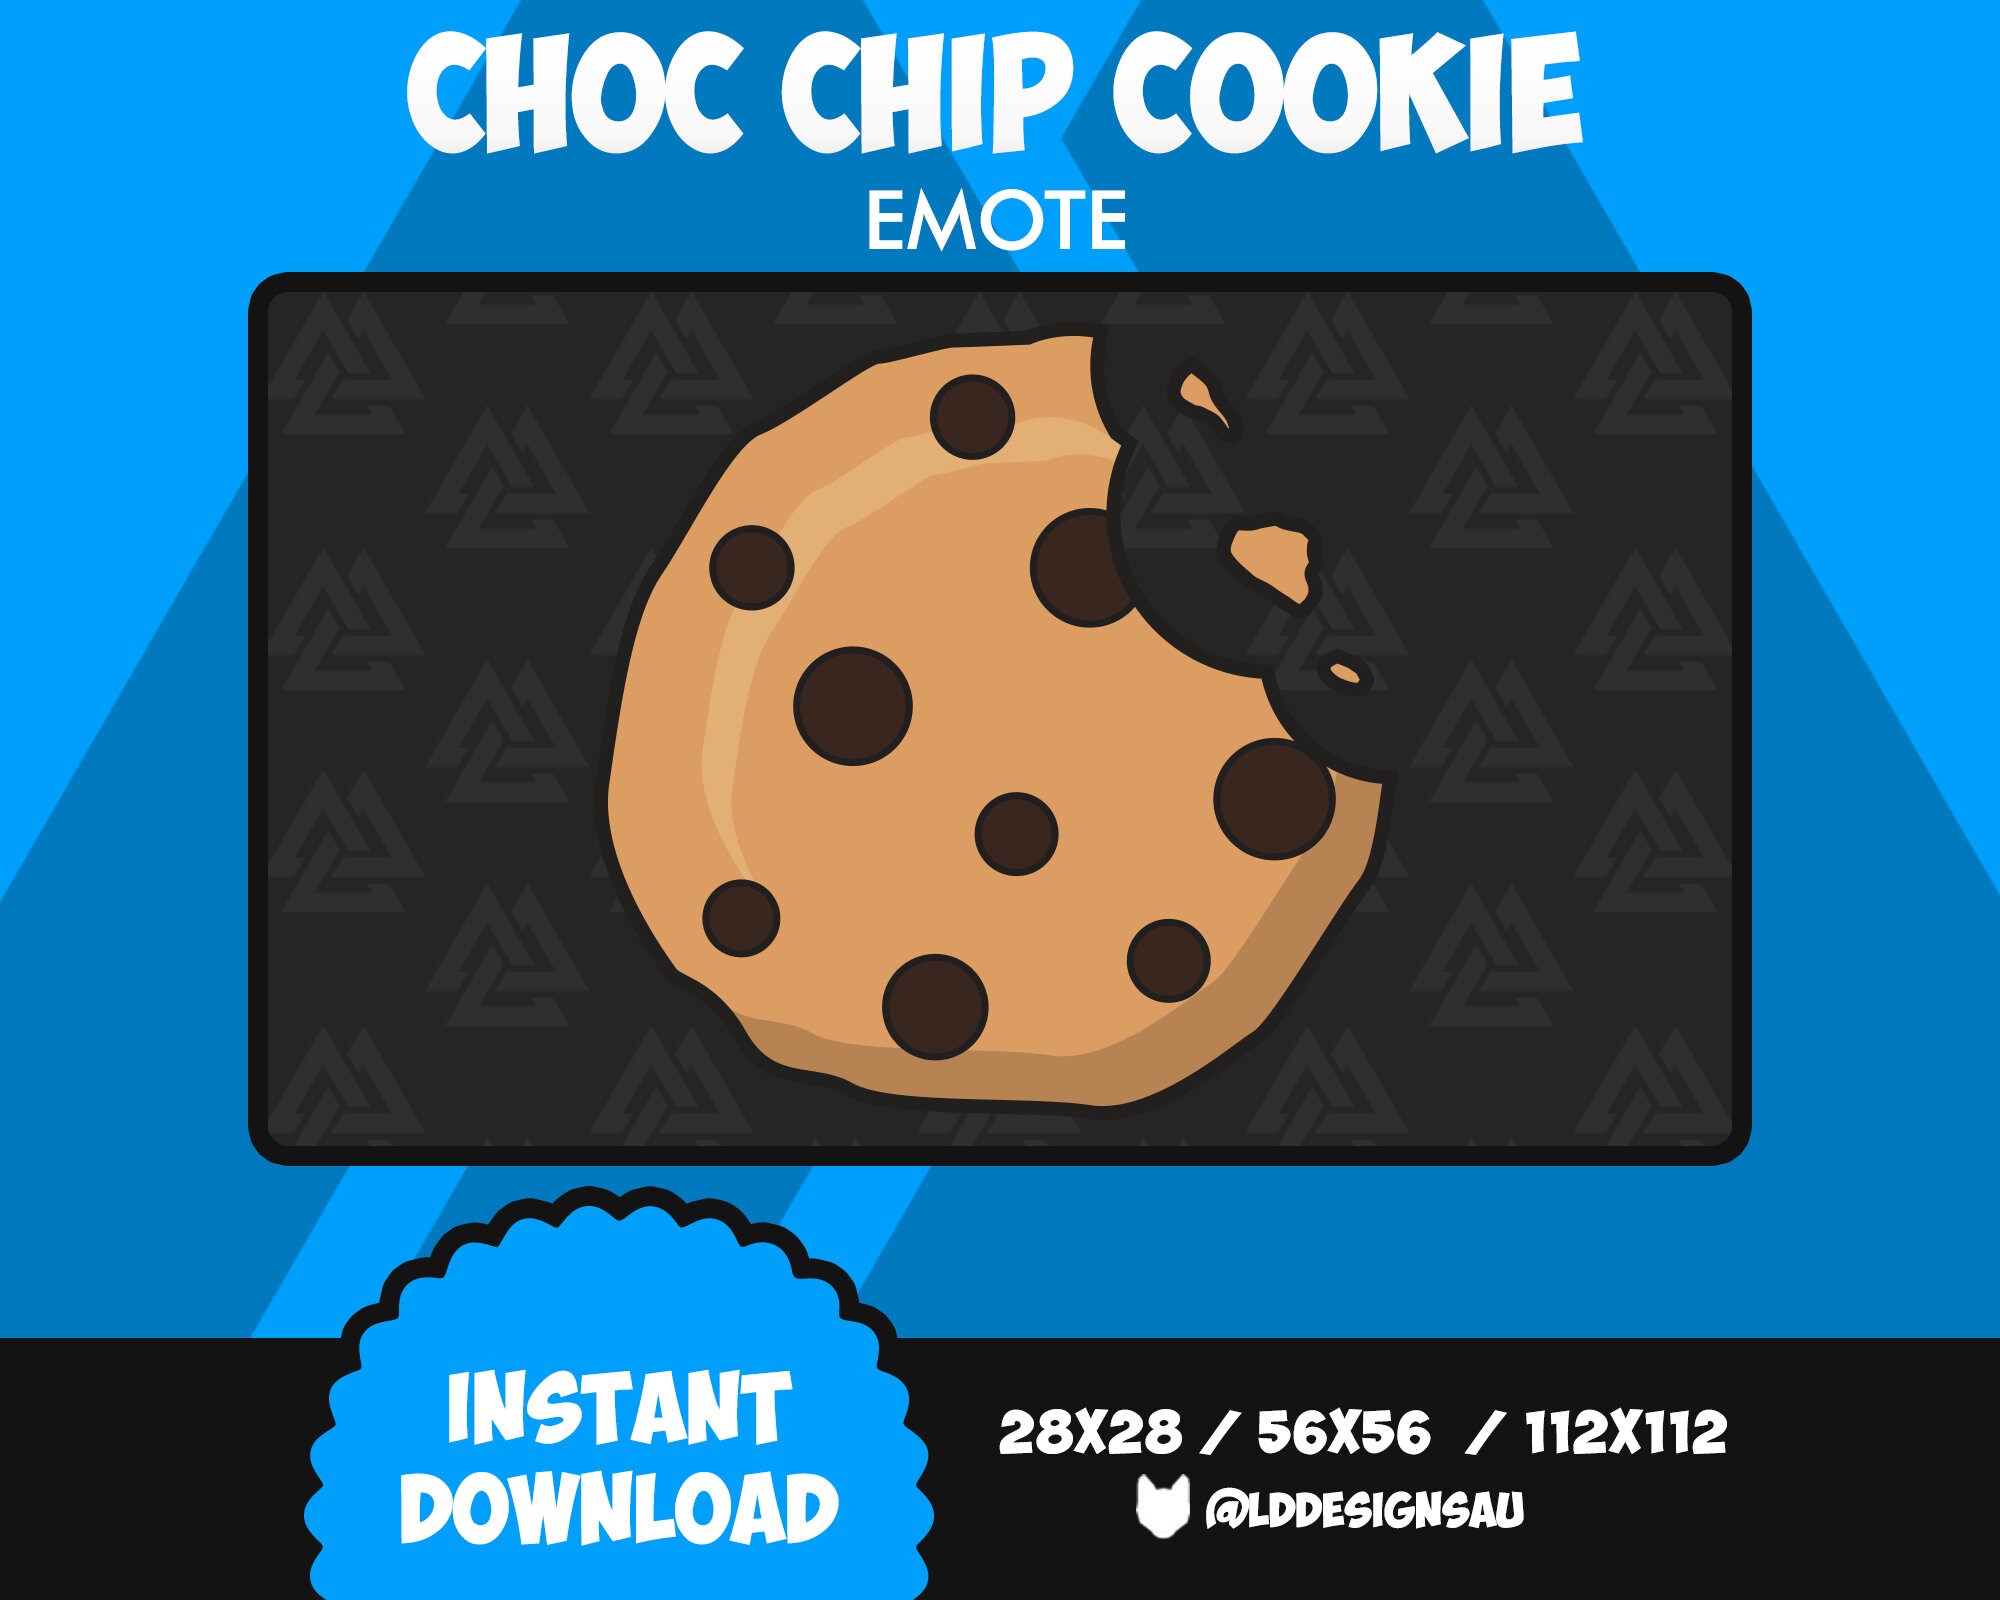 Cookie Twitch Emote Chocolate Chip Cookies Twitch Emote | Etsy